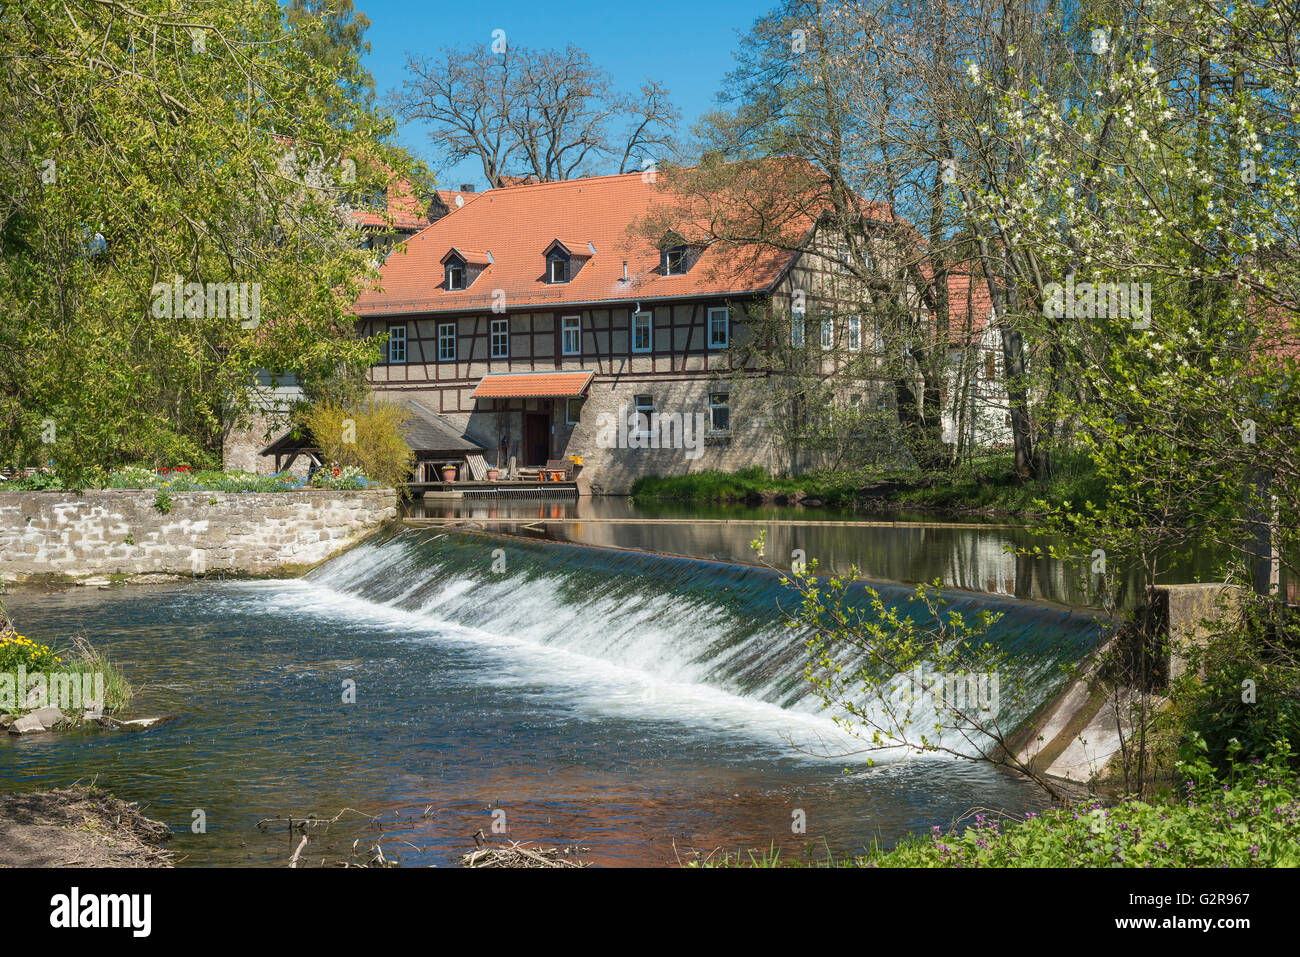 Watermill and weir, River Ilm, oldest mill in Thuringia, Taubach bei Weimar, Thuringia, Germany Stock Photo